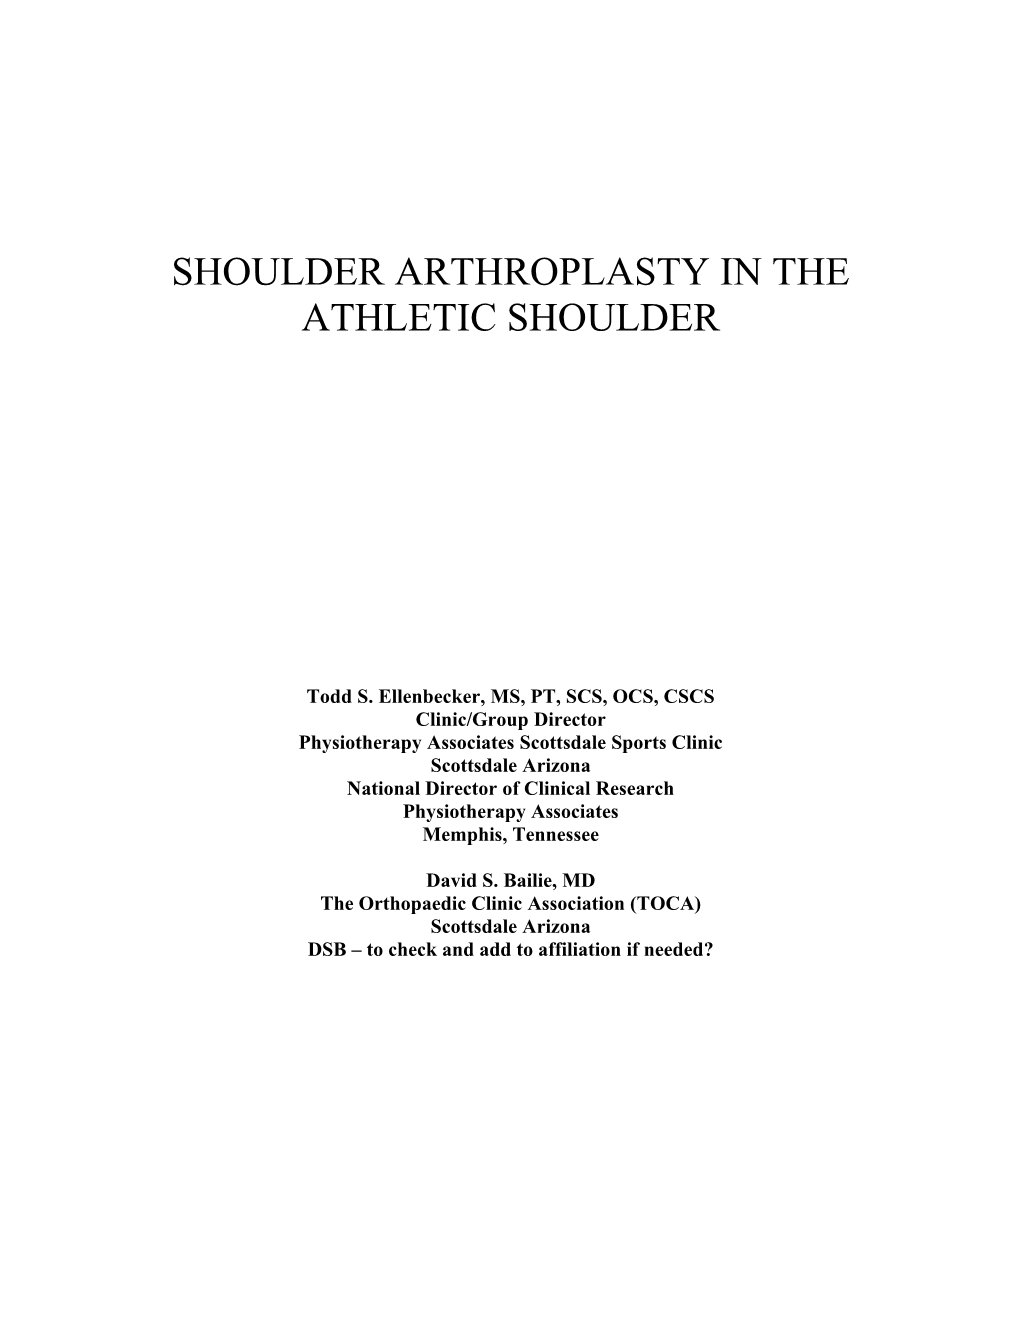 Non-Surgical Treatment of the Osteoarthritic Shoulder